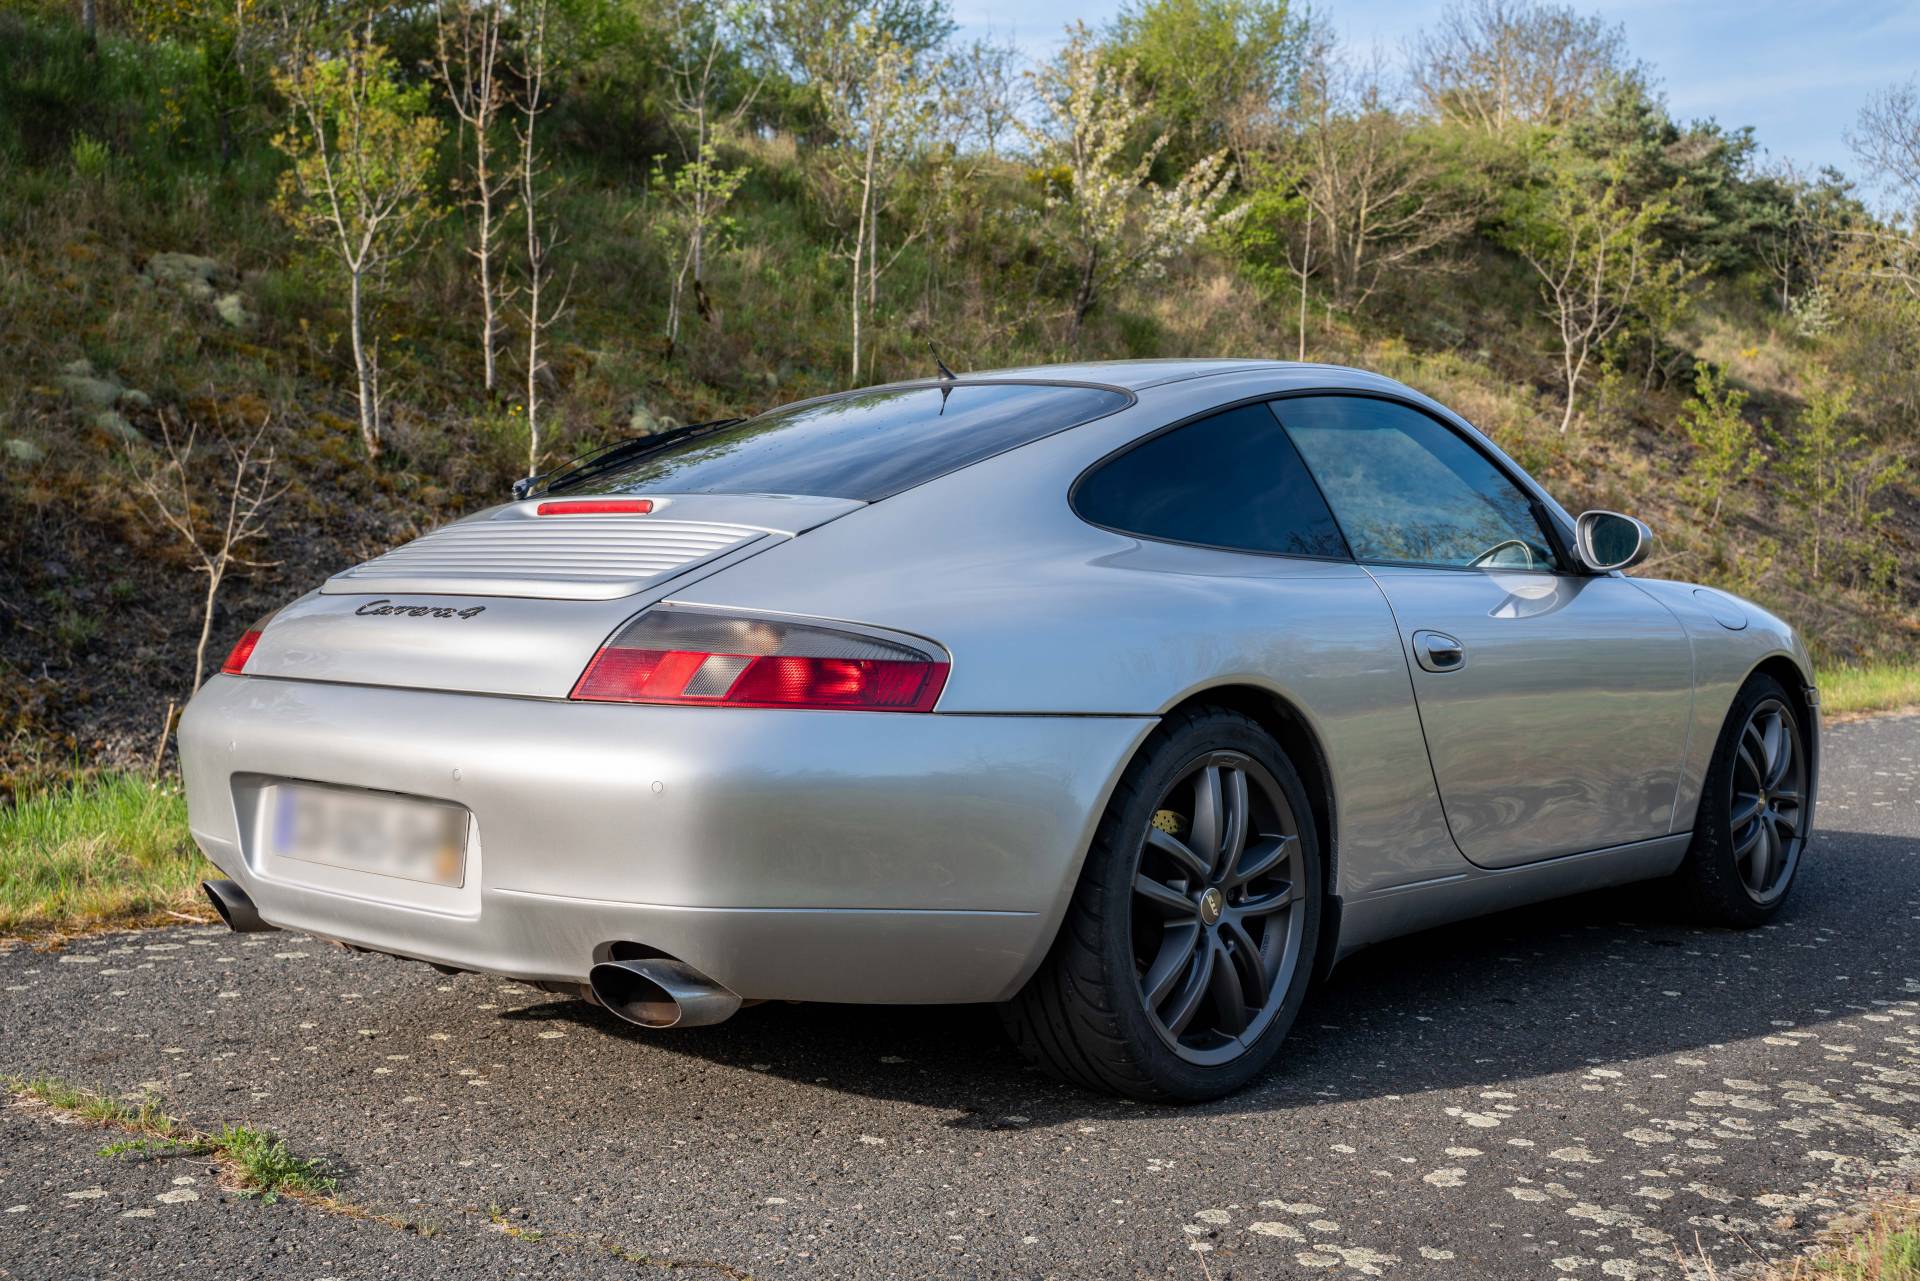 For Sale: Porsche 911 Carrera 4 (2000) offered for $45,674